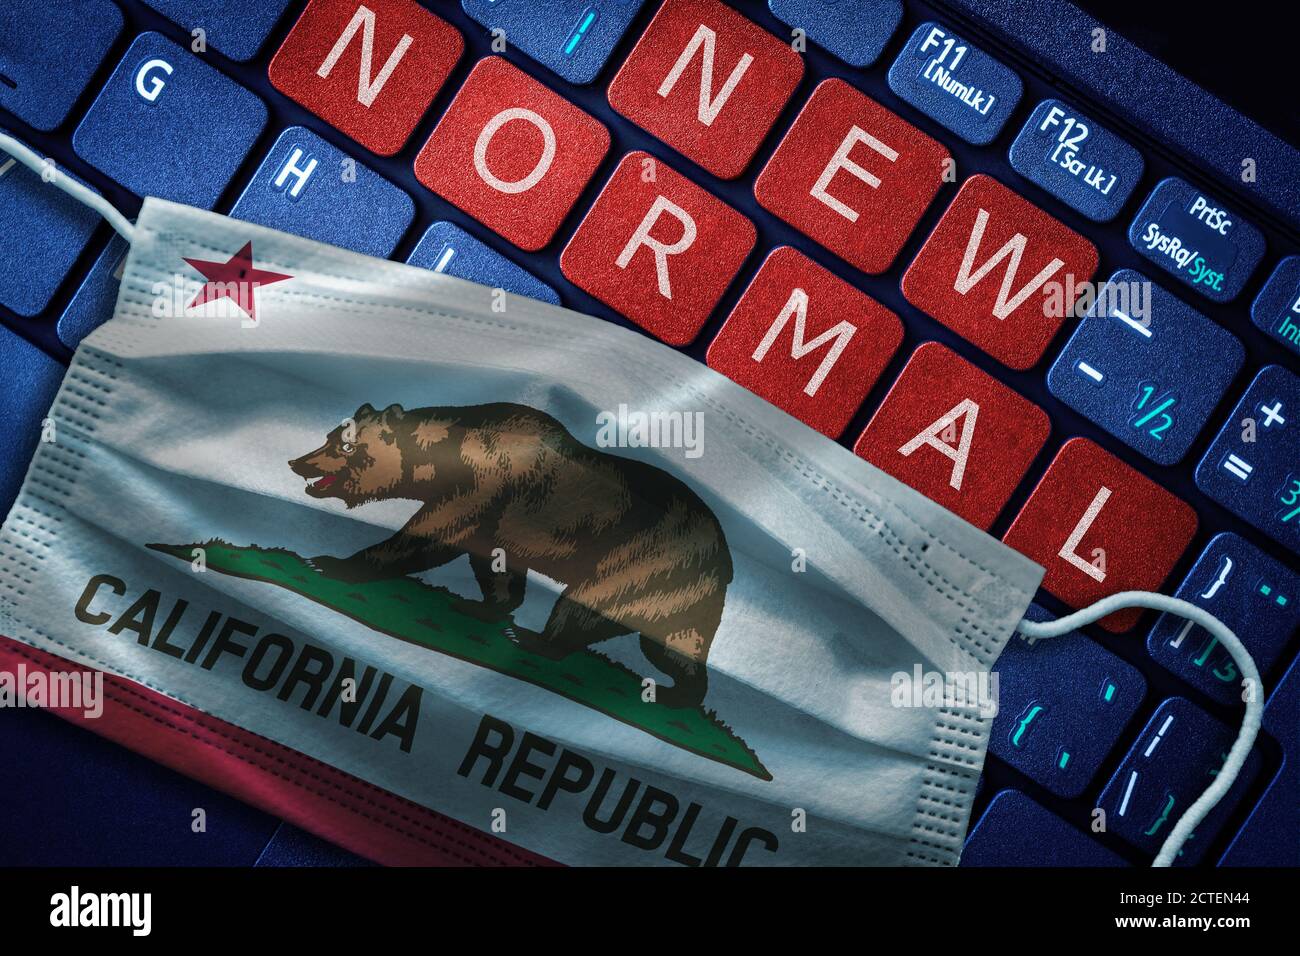 COVID-19 coronavirus new normal concept in the US state of California as shown by Californian flag on face mask with New Normal on laptop red alert ke Stock Photo